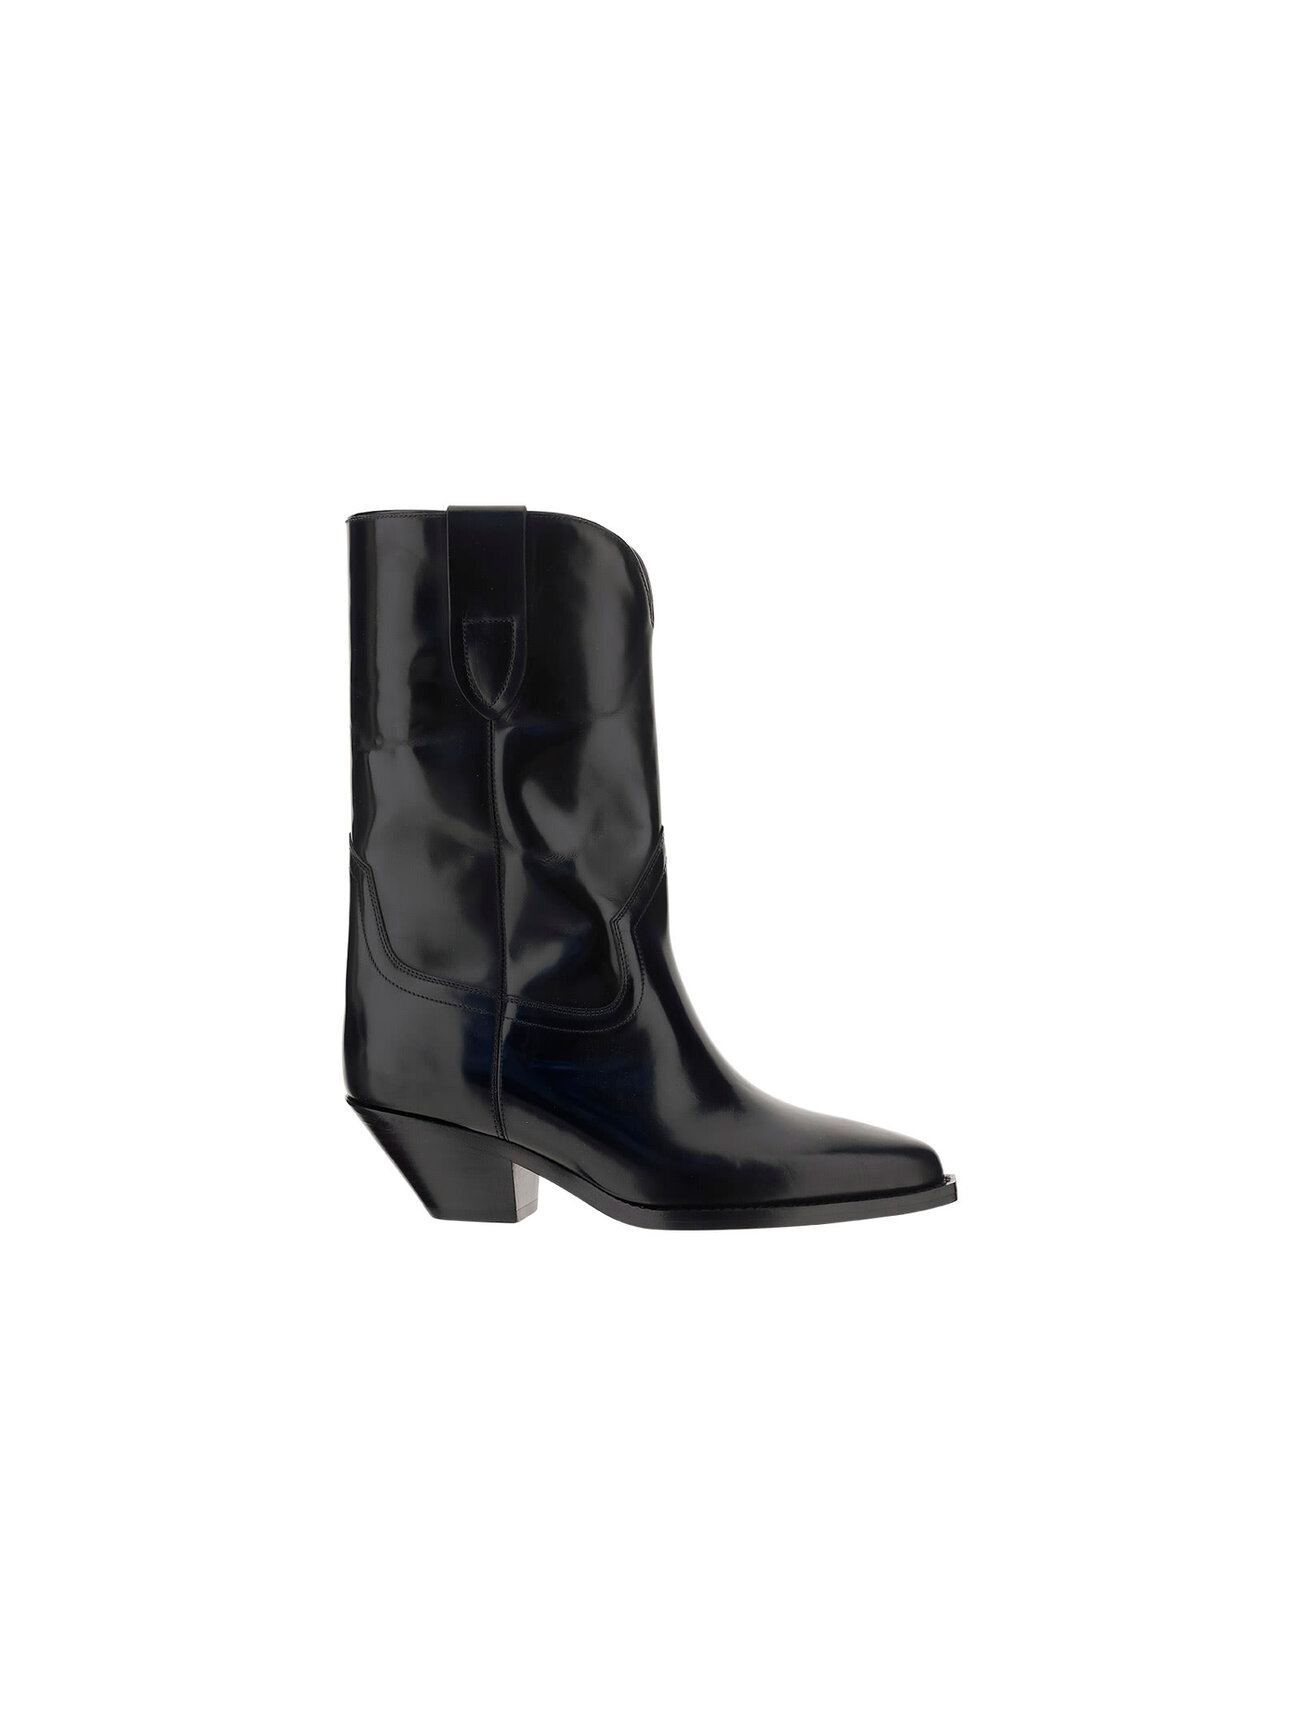 Isabel Marant Dahope Boots in black